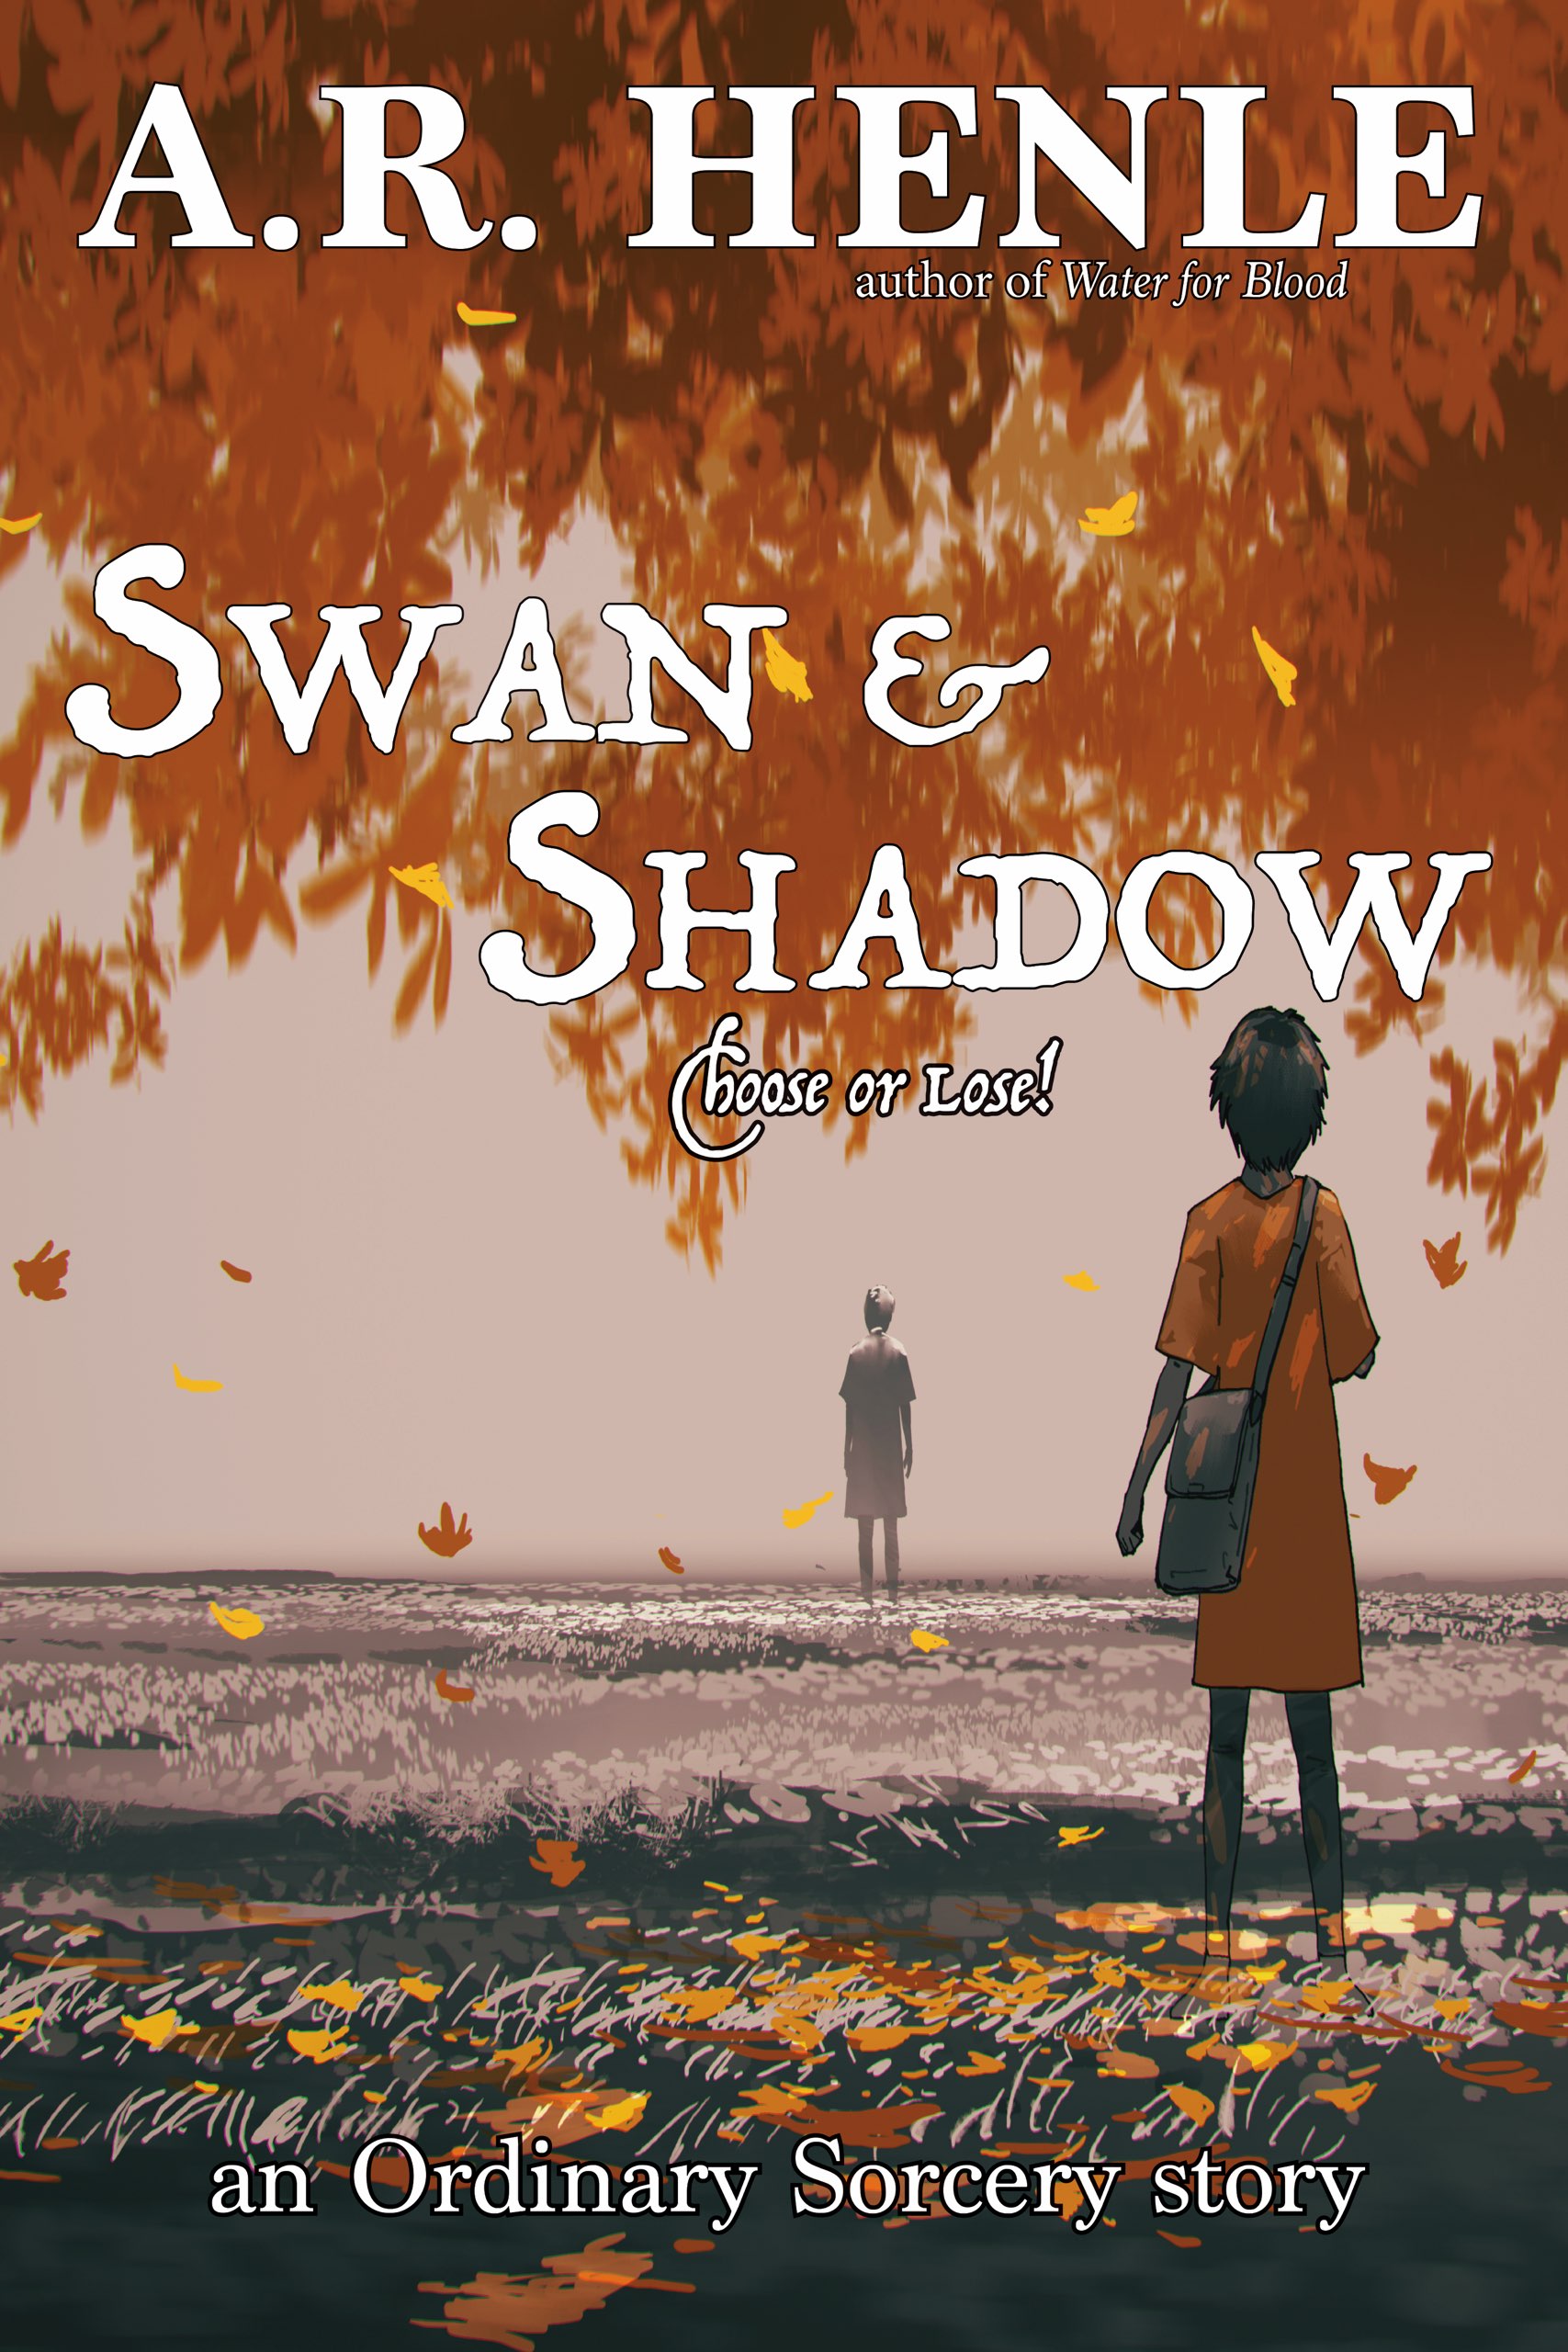 Cover for Swan & Shadow. A woman stands under an autumnal tree, looking at a man in the distance